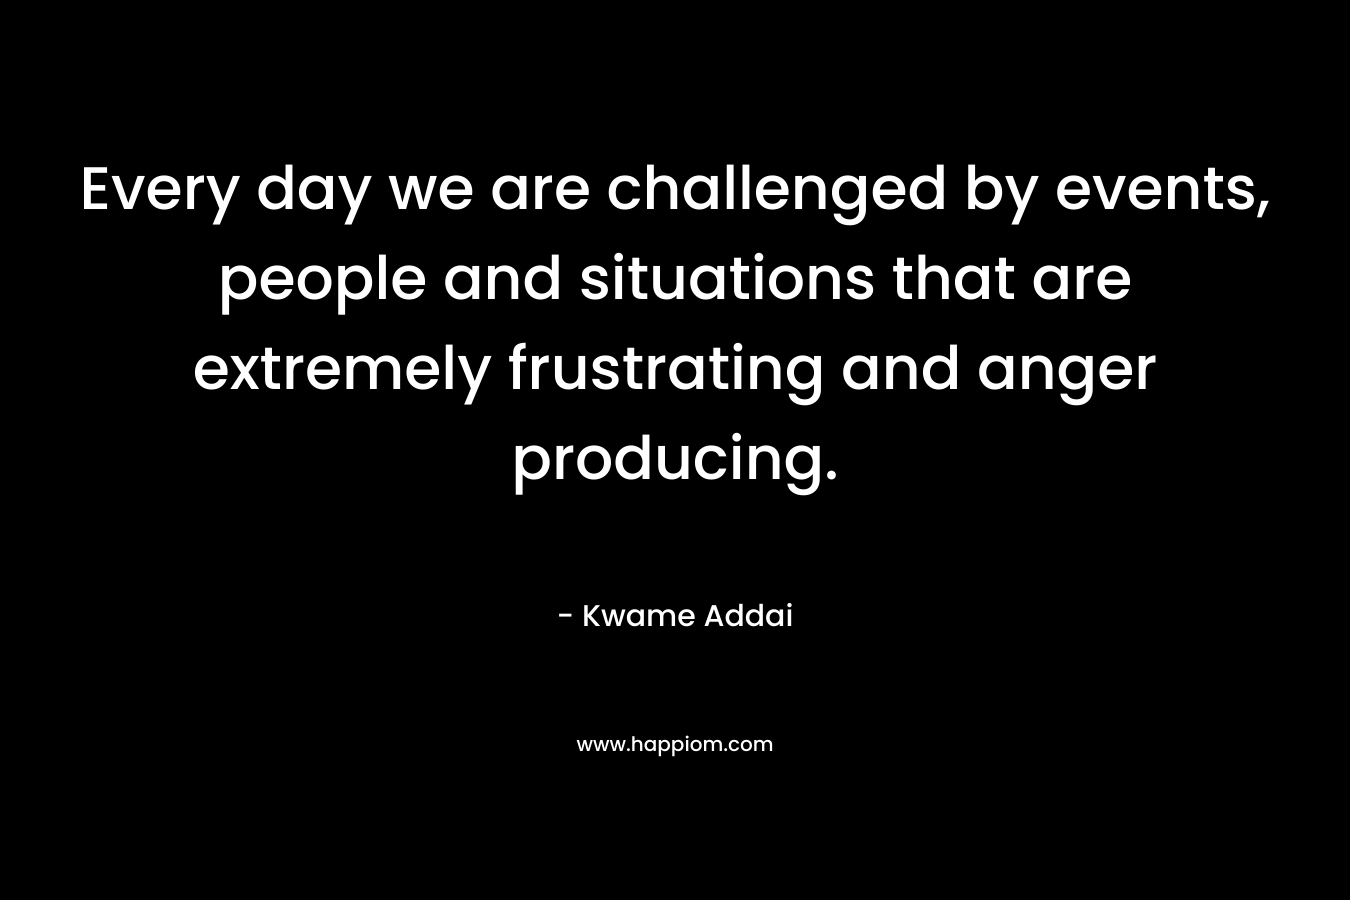 Every day we are challenged by events, people and situations that are extremely frustrating and anger producing. – Kwame Addai